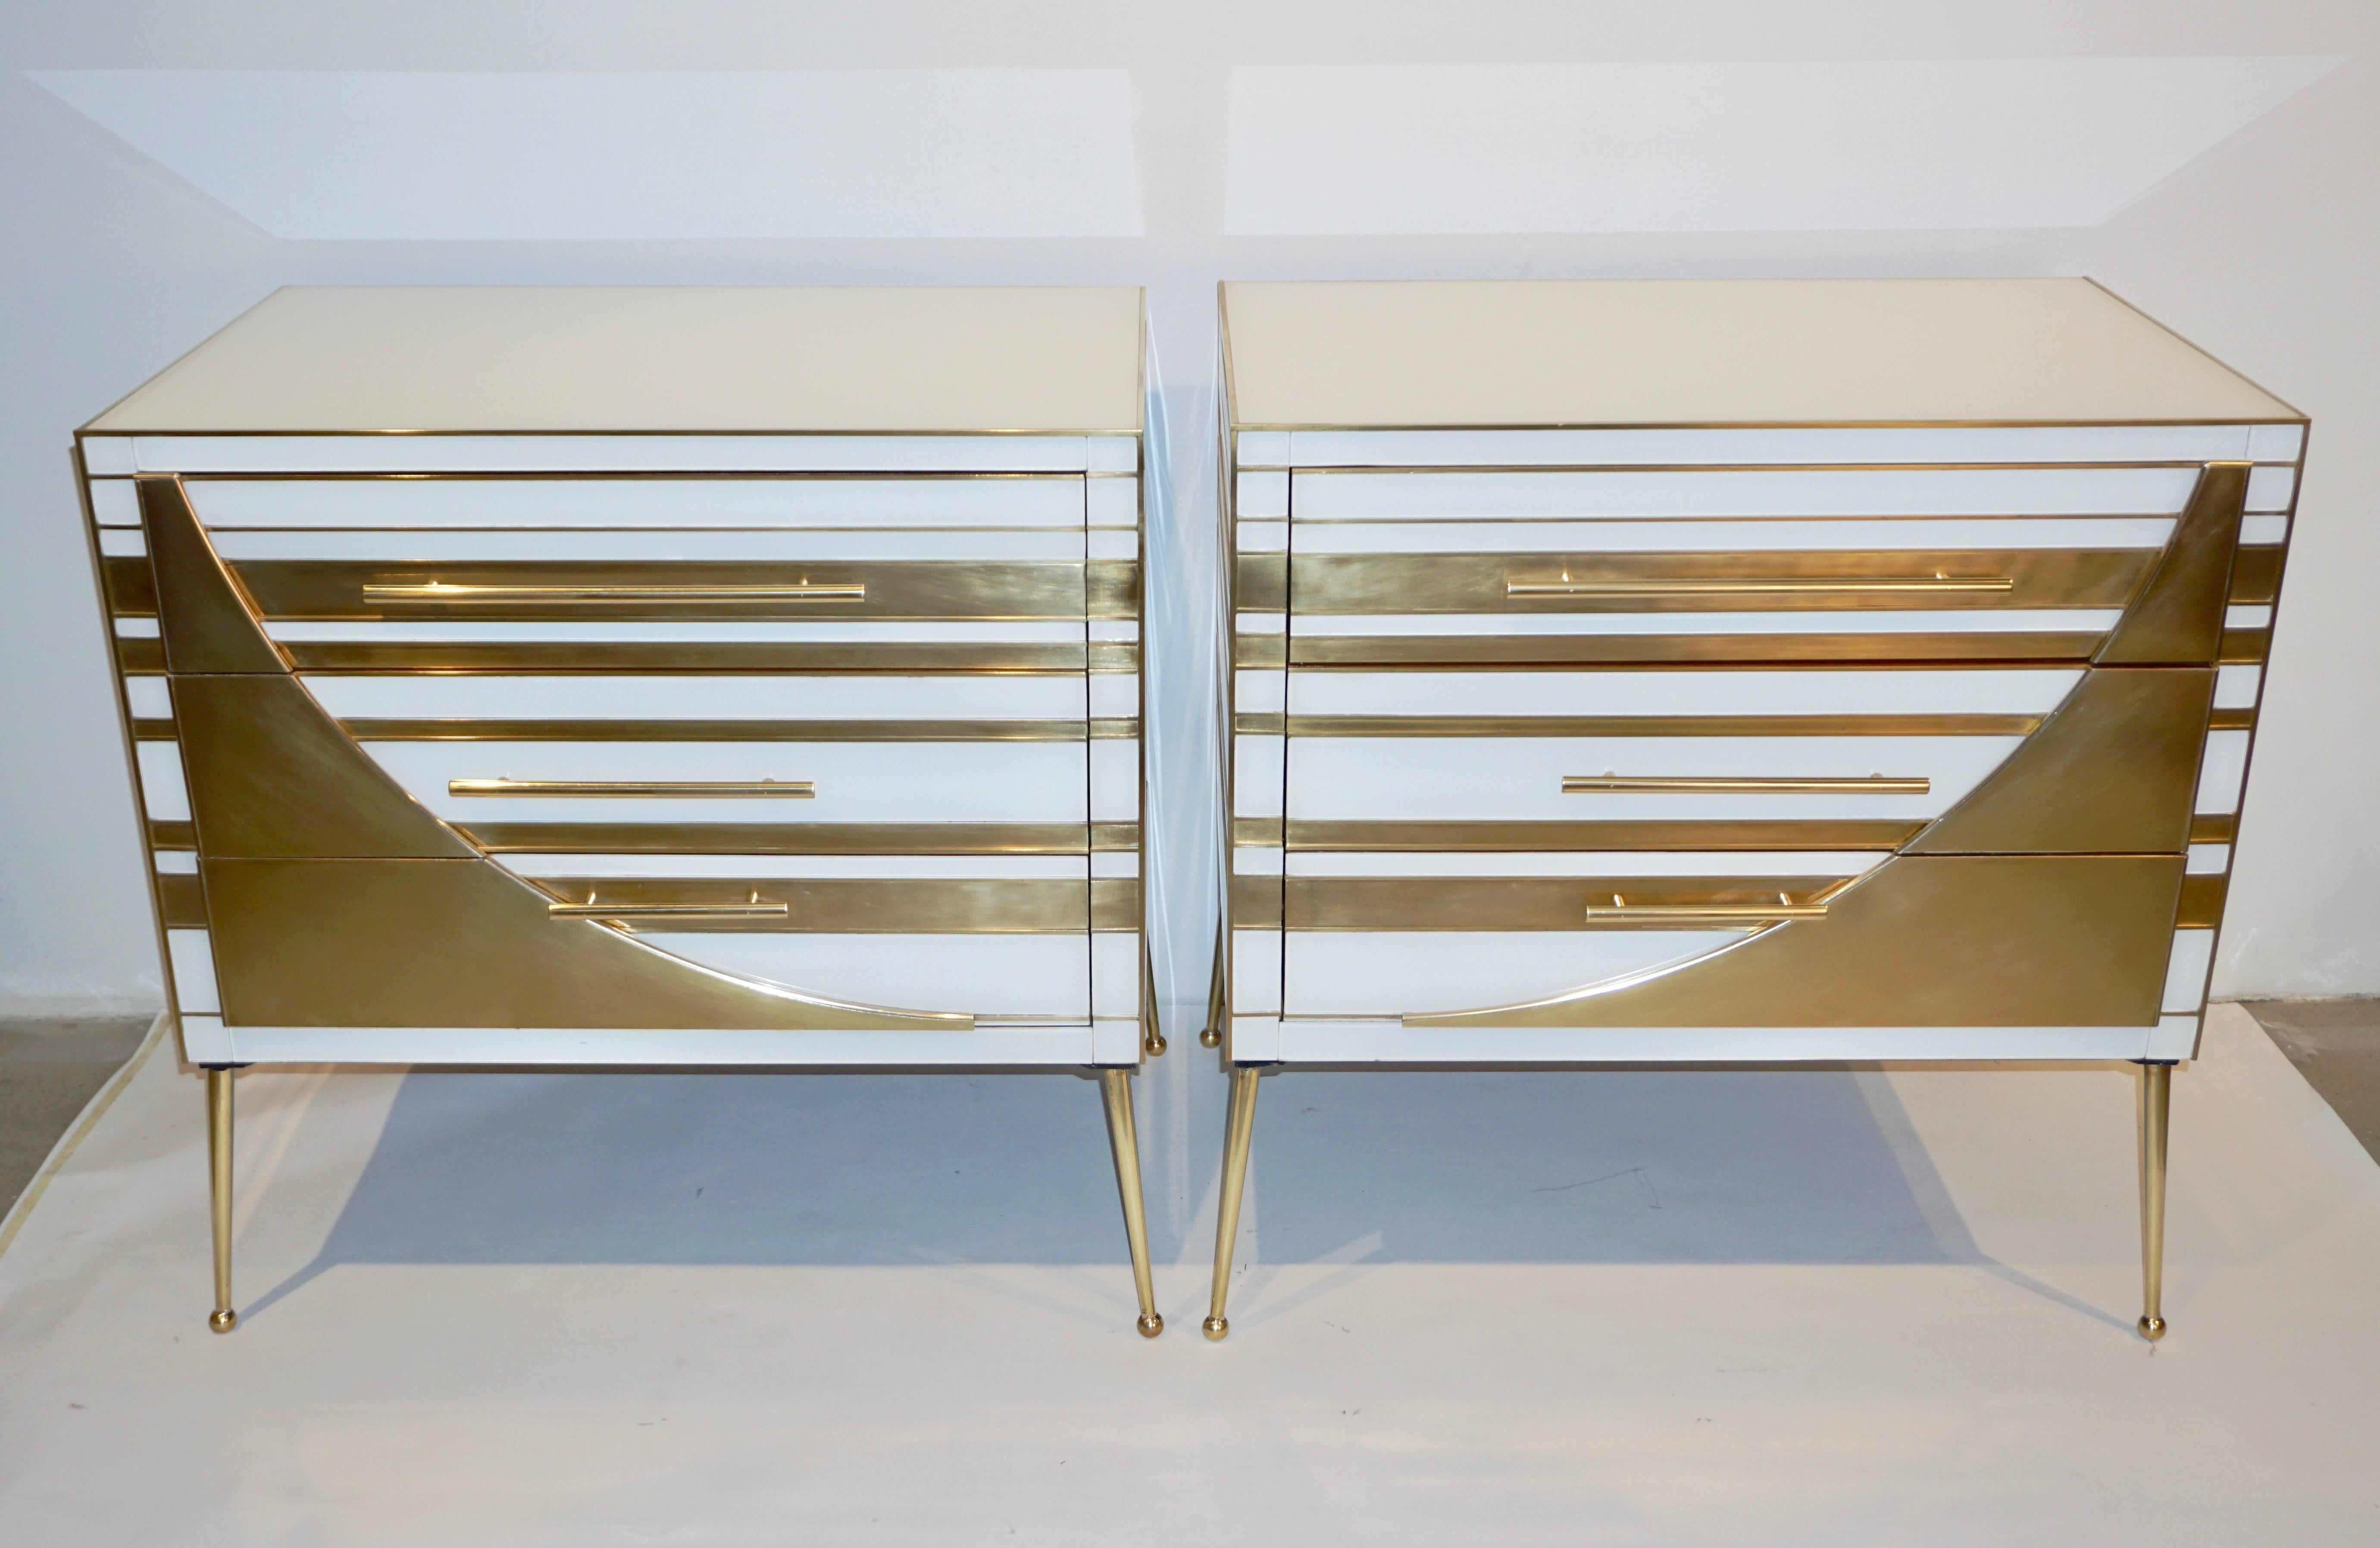 This Italian exclusive pair of modern chests, that can be used as end, side tables or nightstands, present a unique Art Deco Style fine design, quality of construction and use of mixed material techniques: metal and glass on wood. Entirely